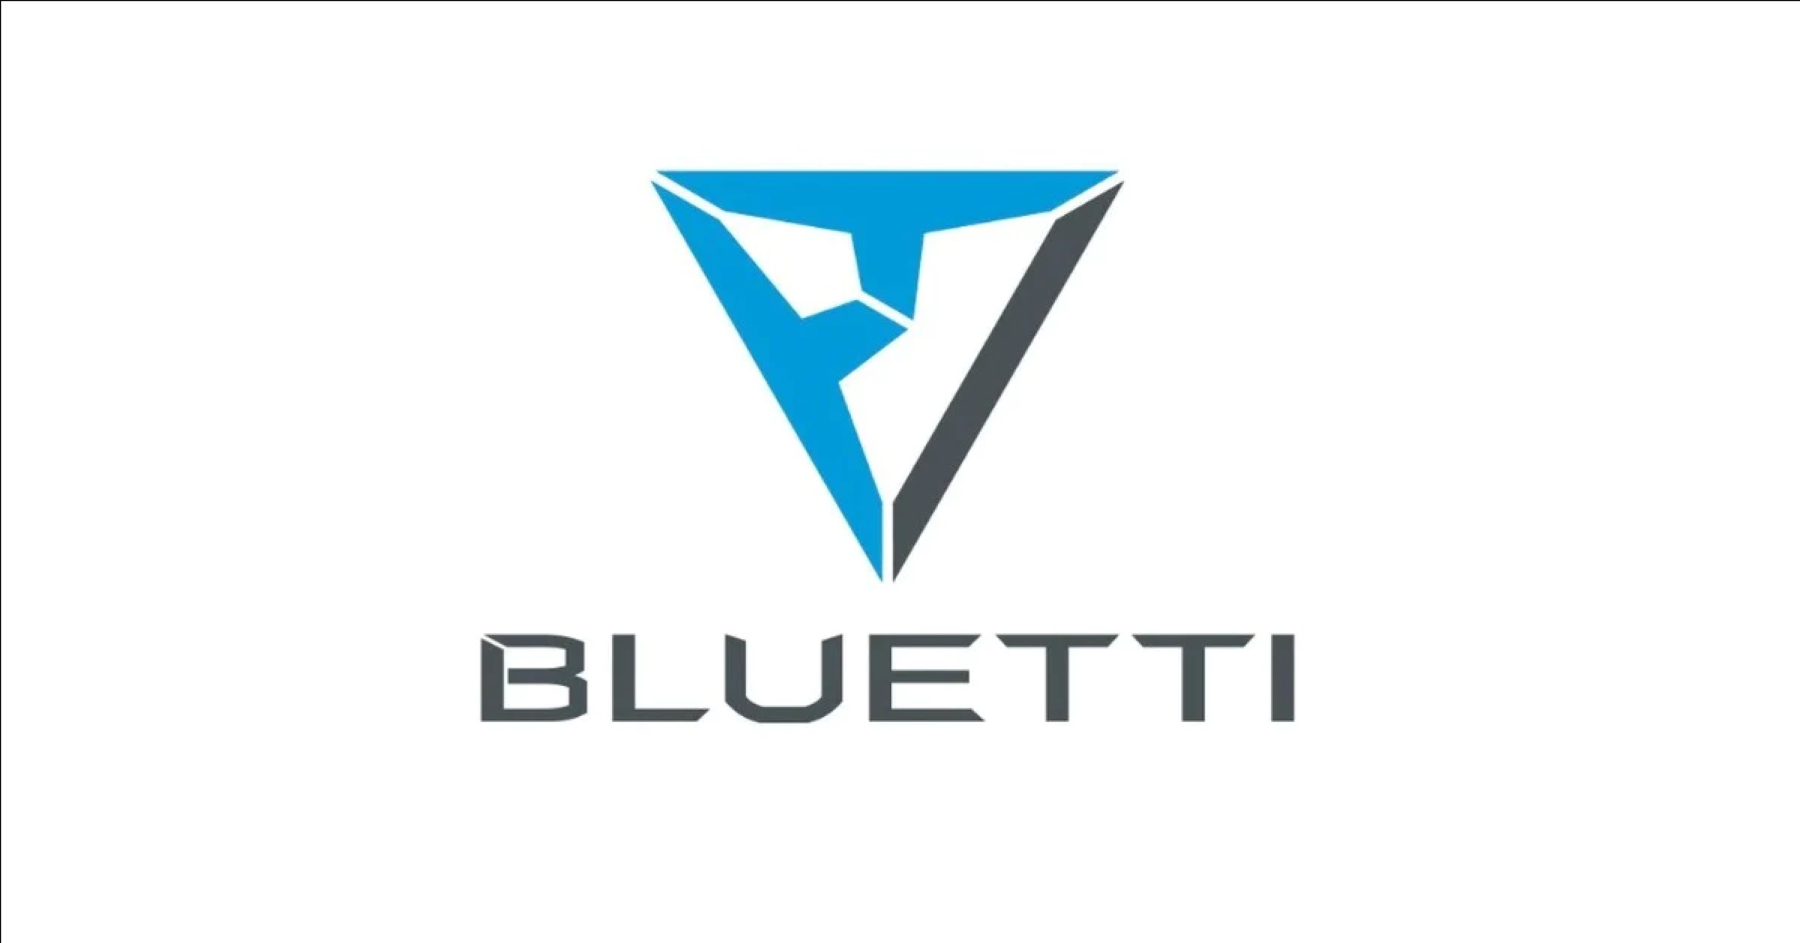 BLUETTI to Showcase New Power Solutions at The Smarter E Europe Exhibition